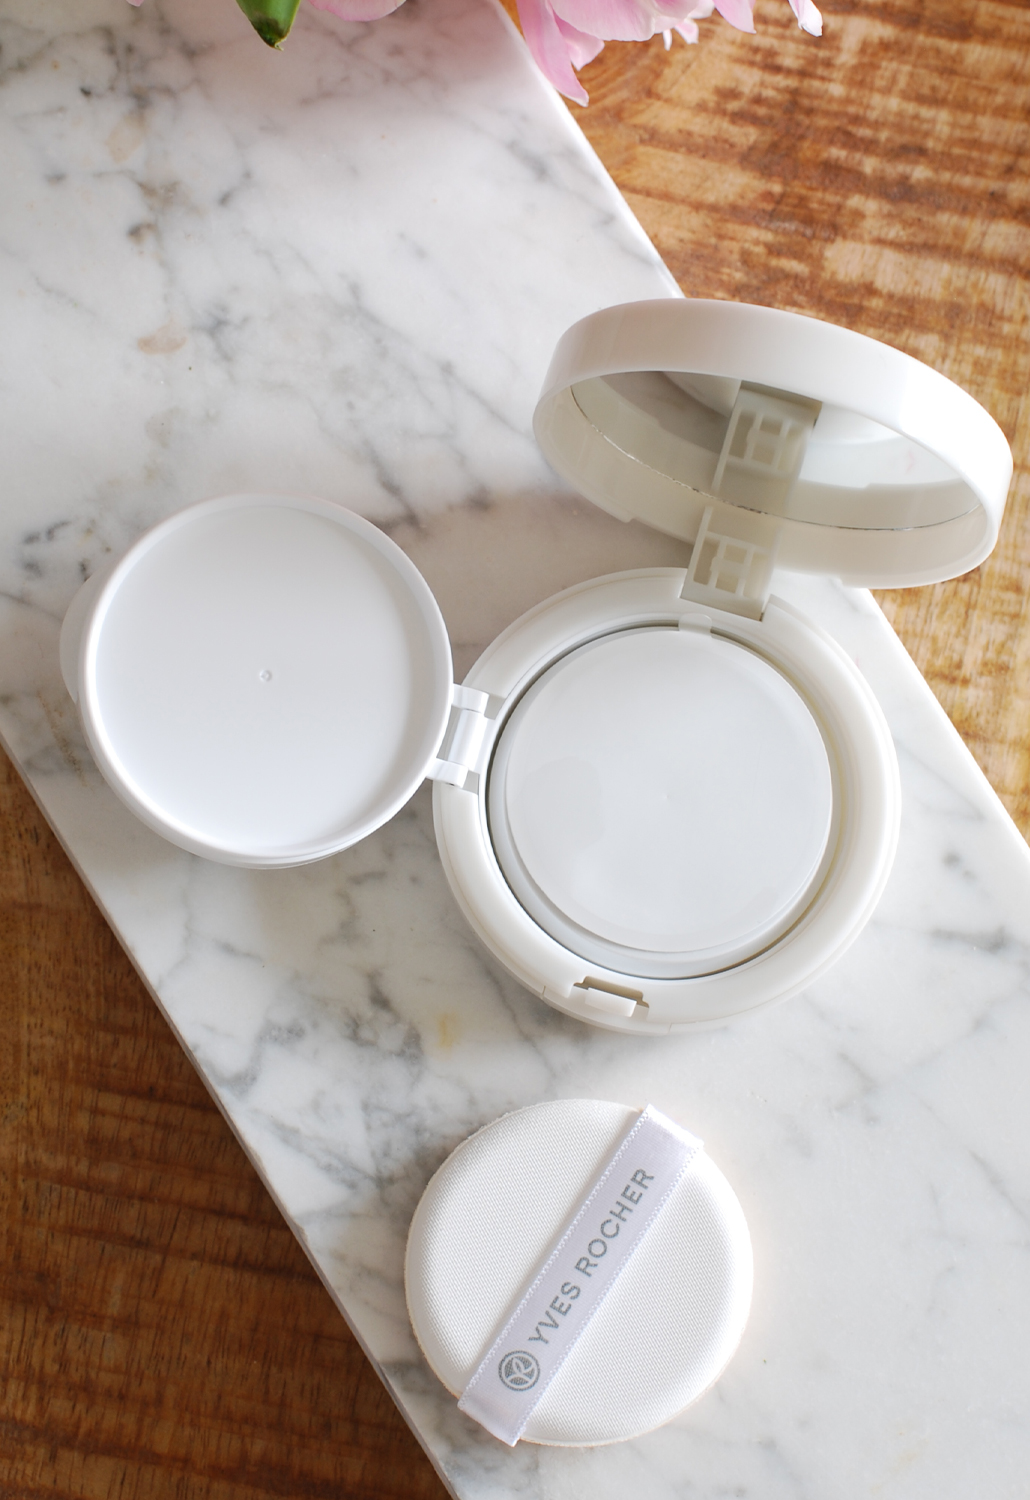 Pure Light Cushion Foundation Yves Rocher beige 200 light foundation review lifestyle by linda